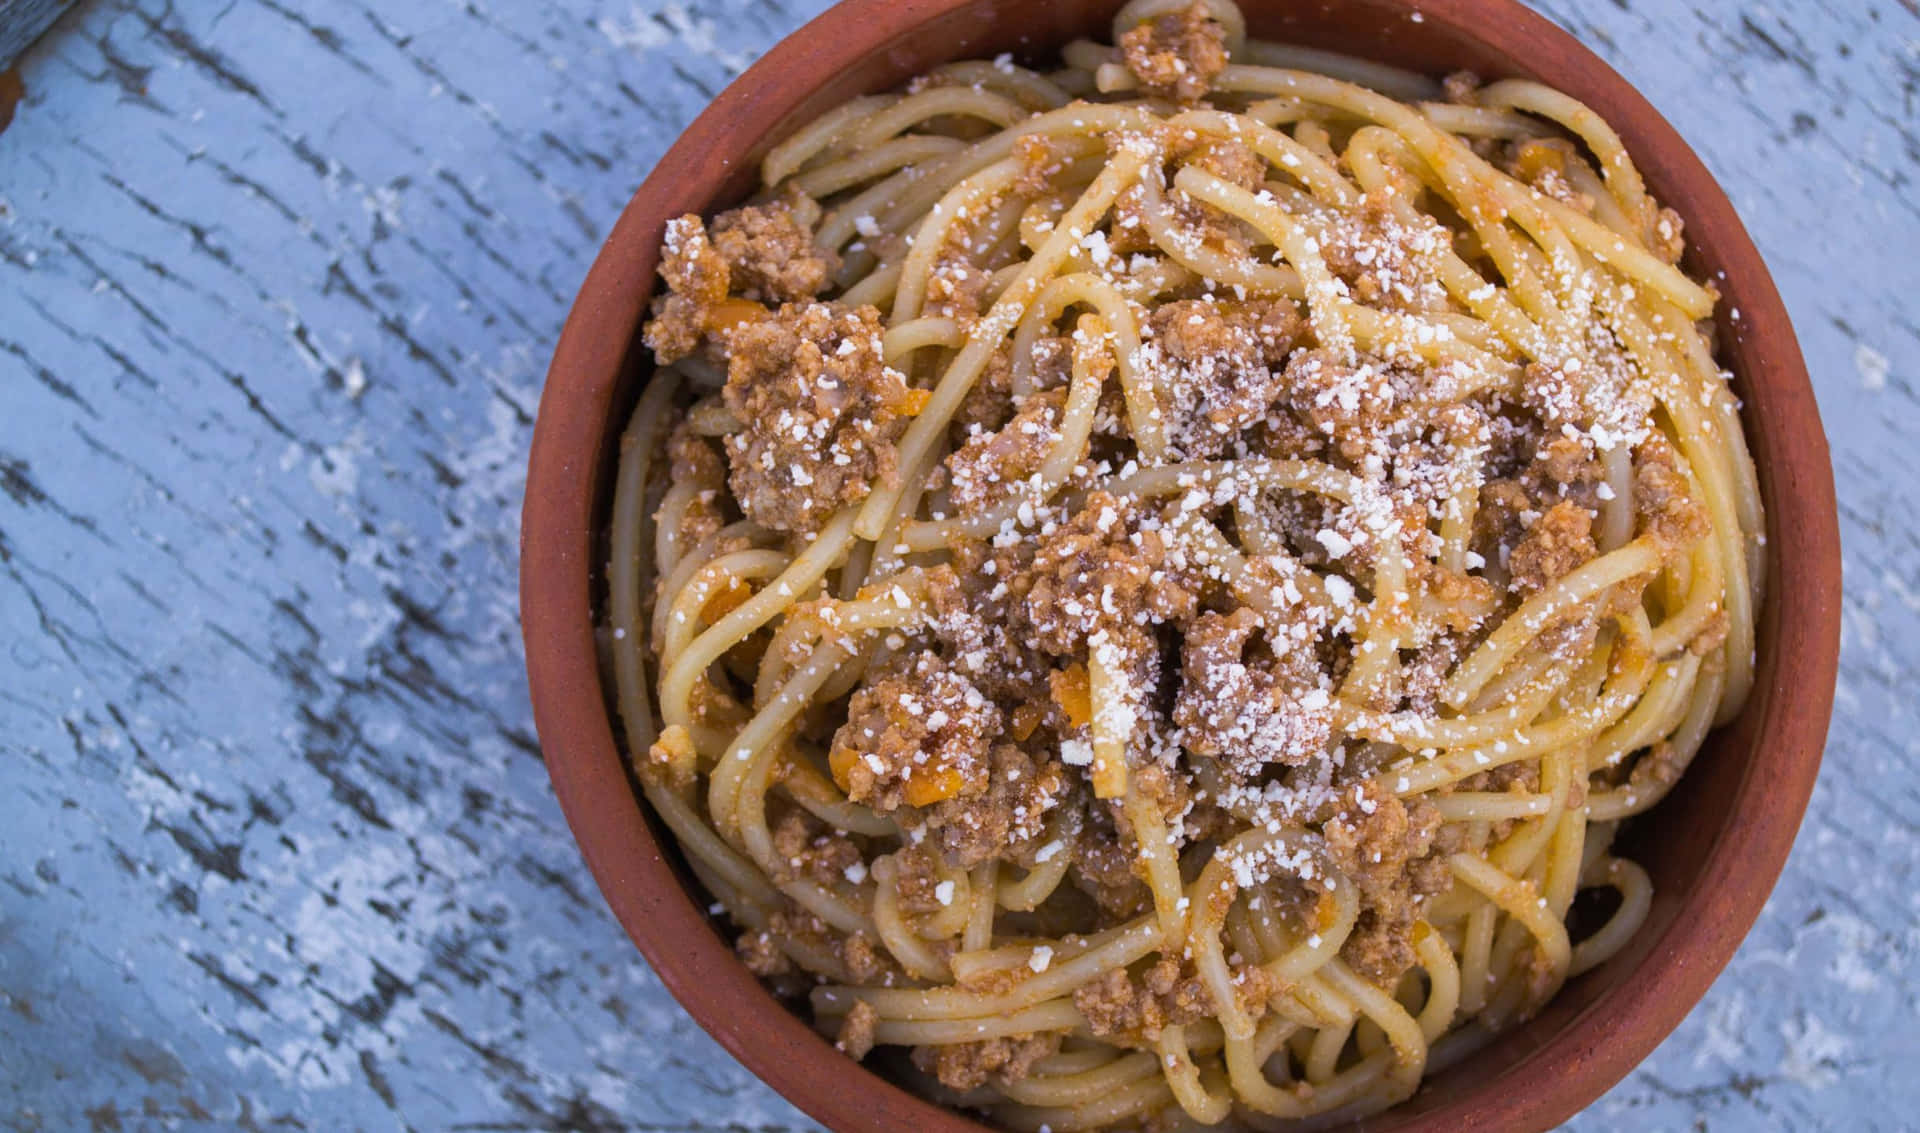 A Bowl Of Spaghetti With Meat And Parmesan